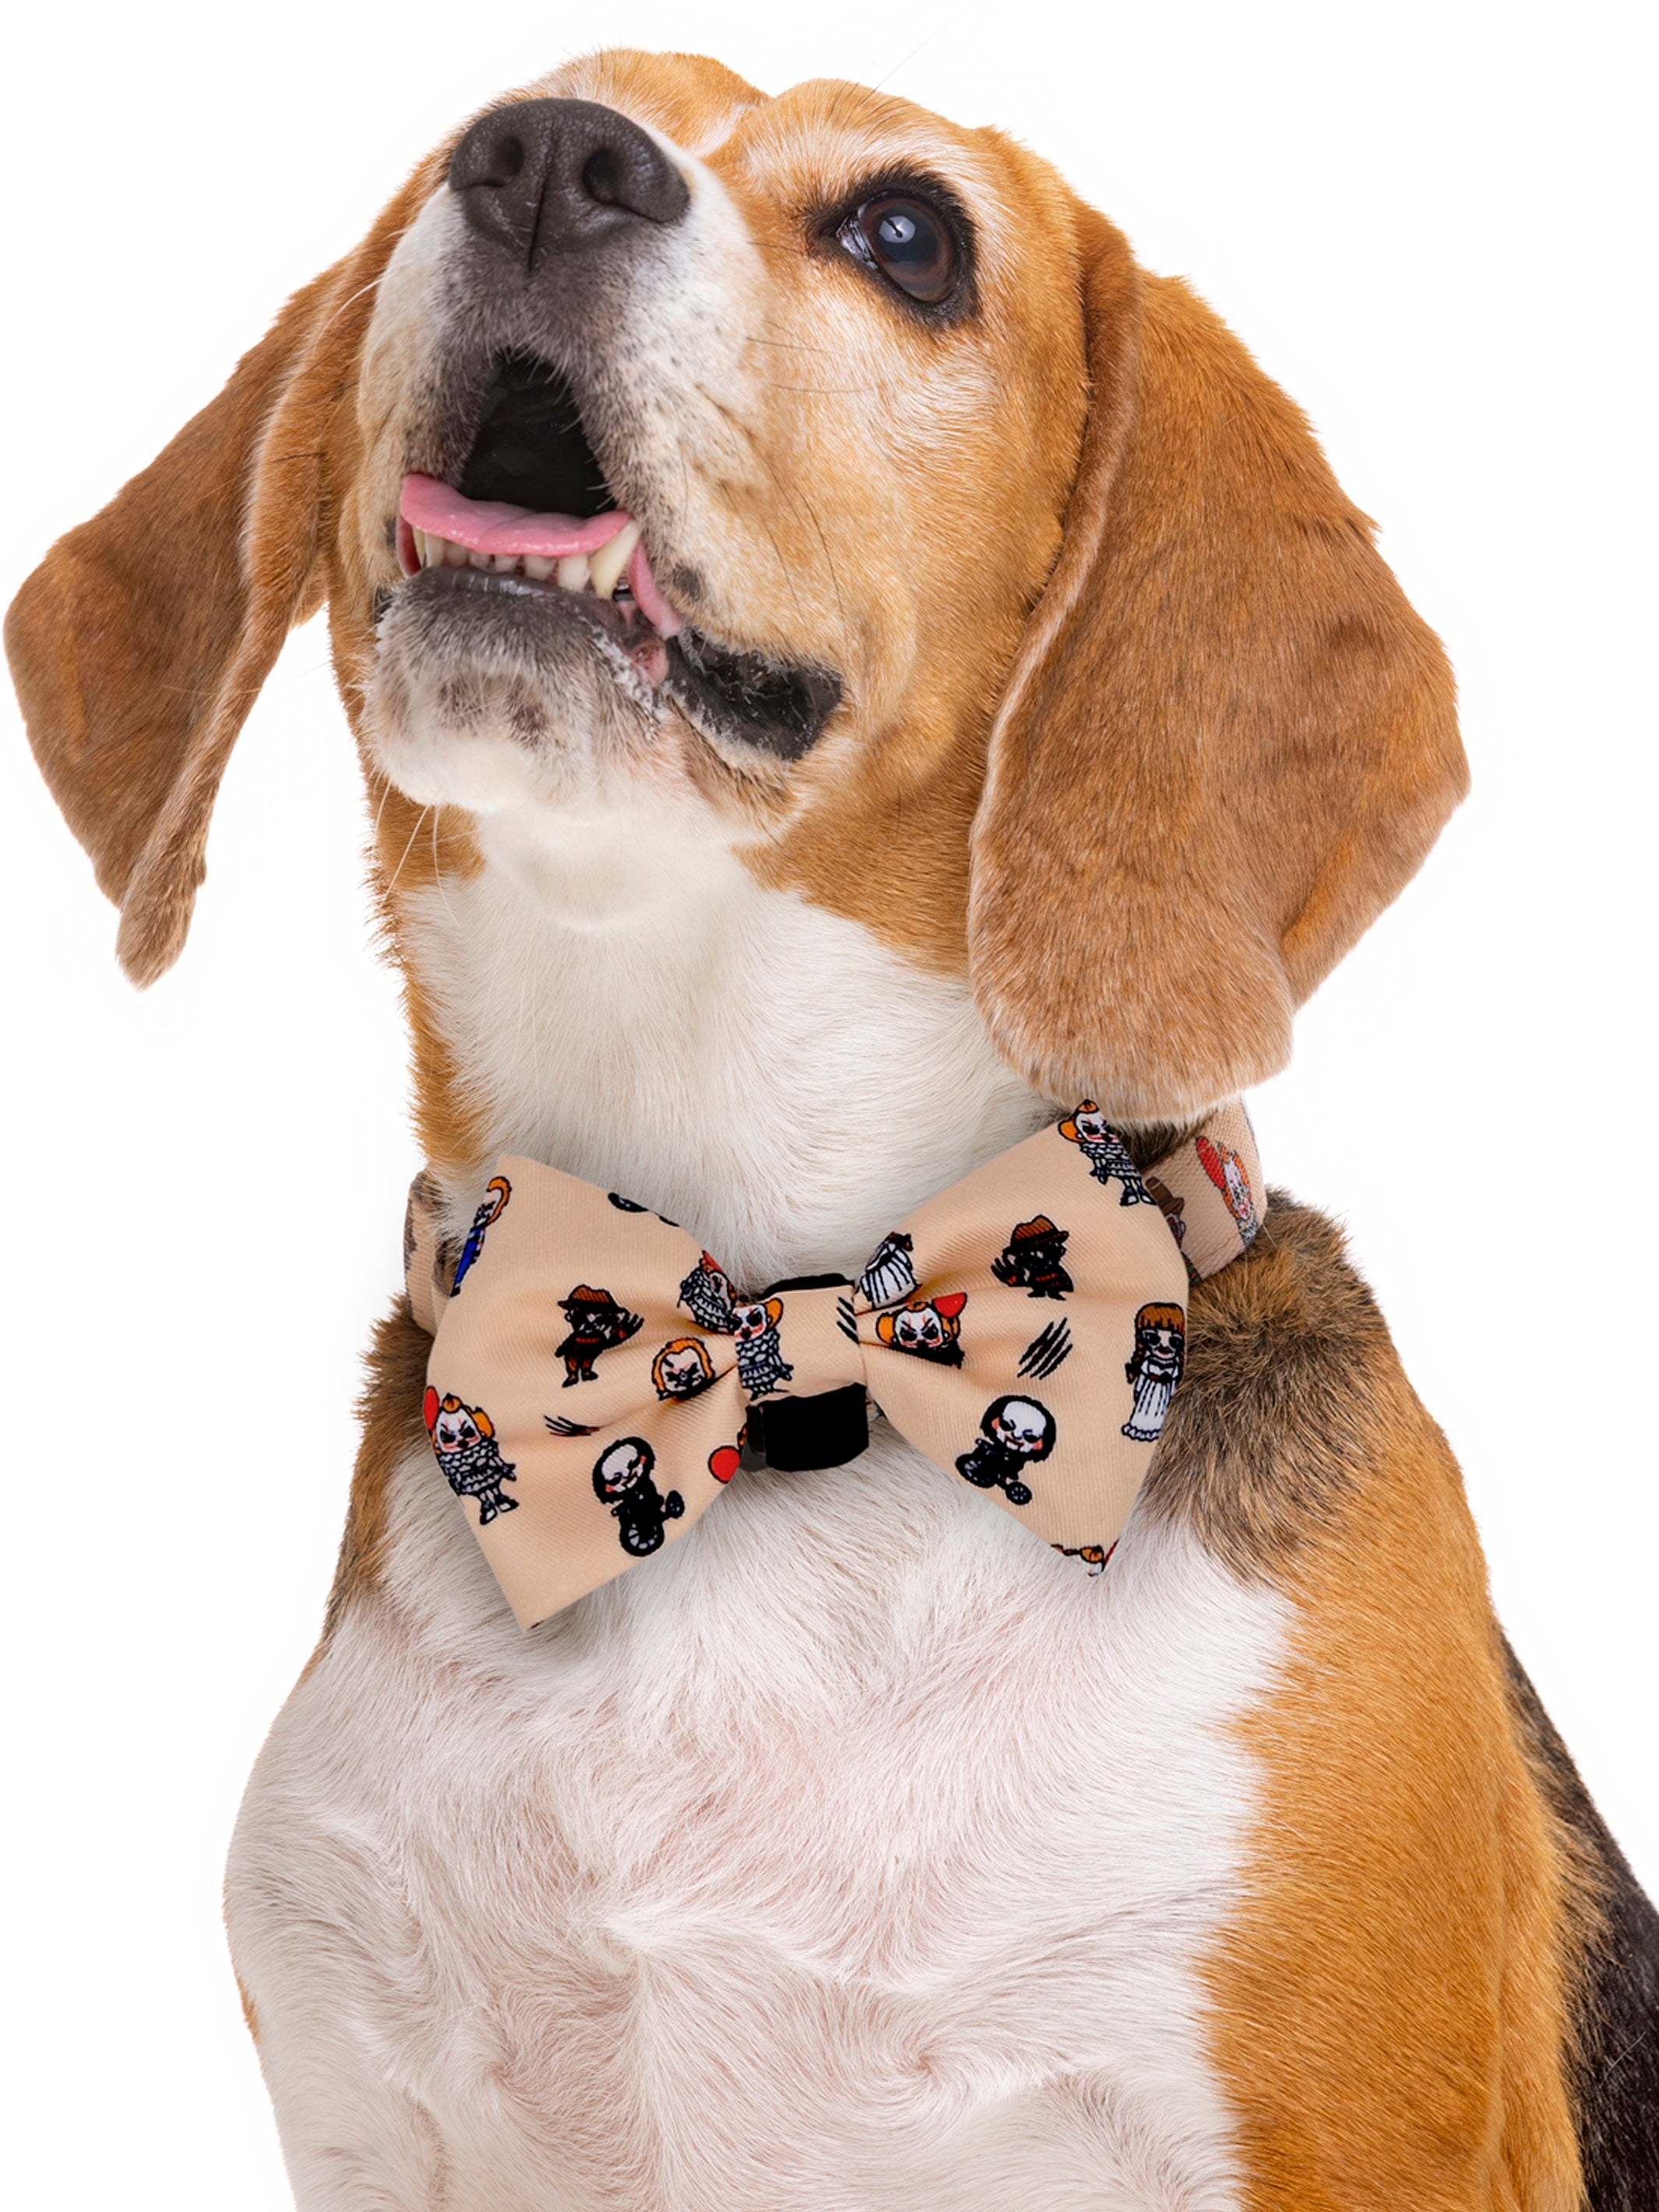 HORROR BOW TIE FOR DOGS